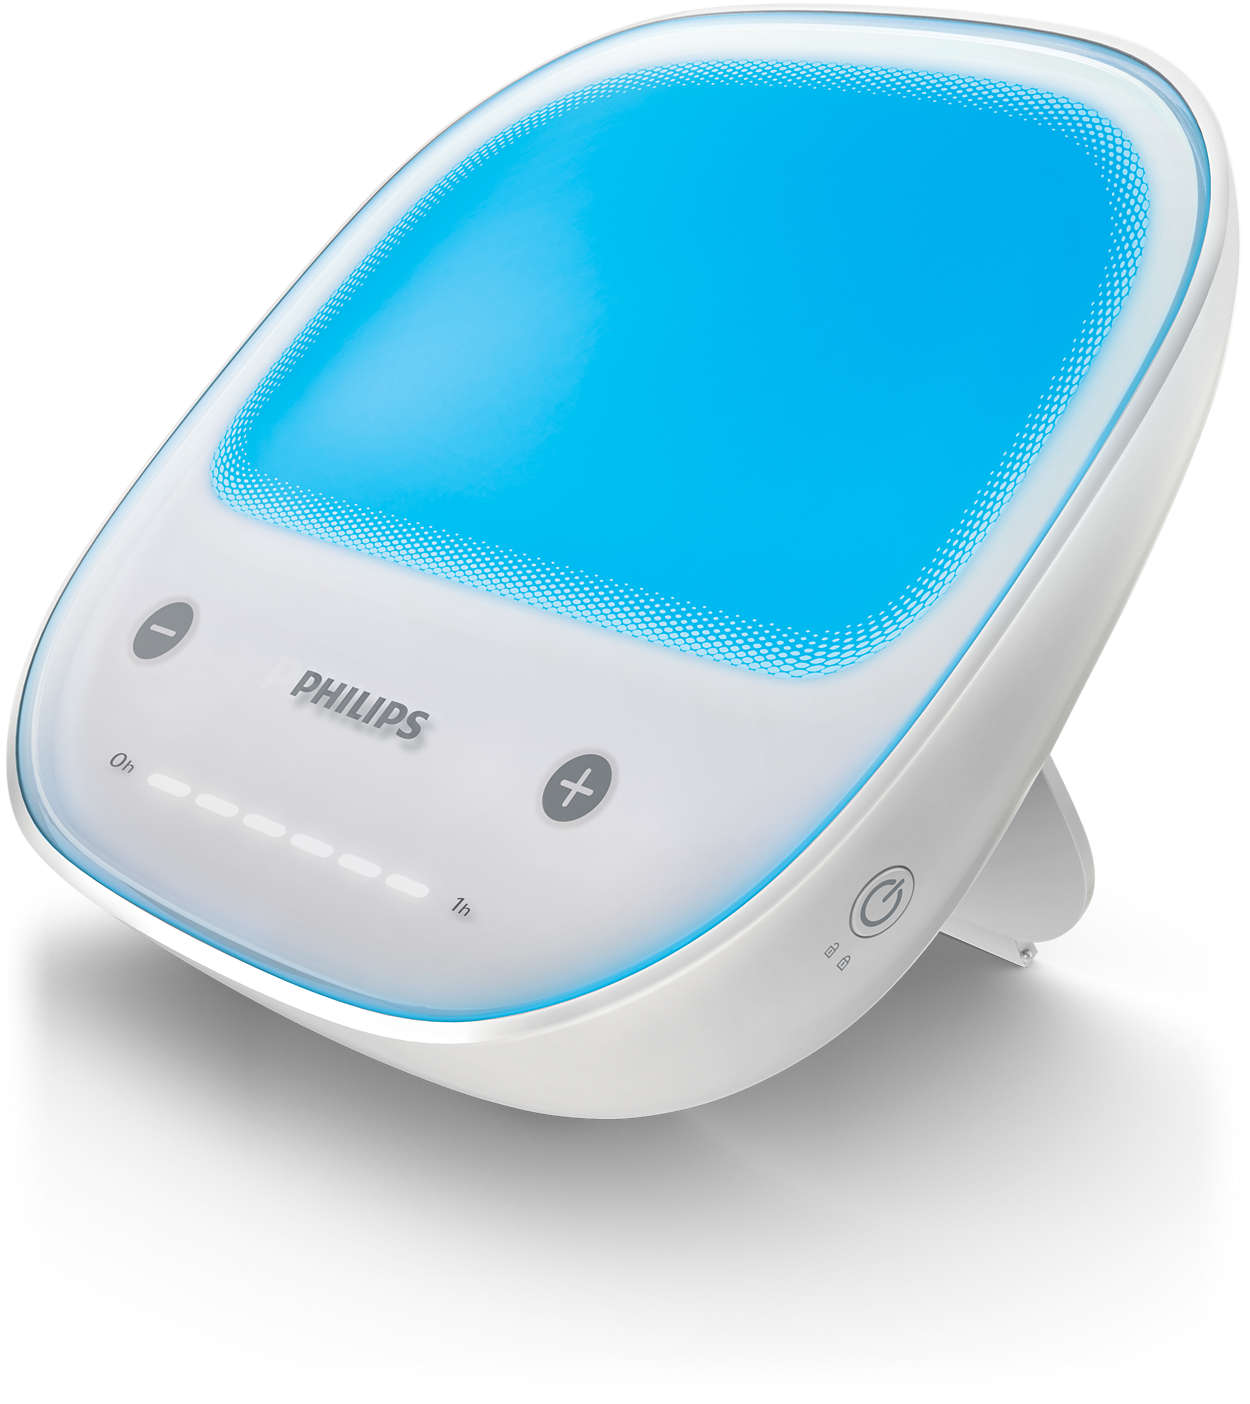 Philips energyup review